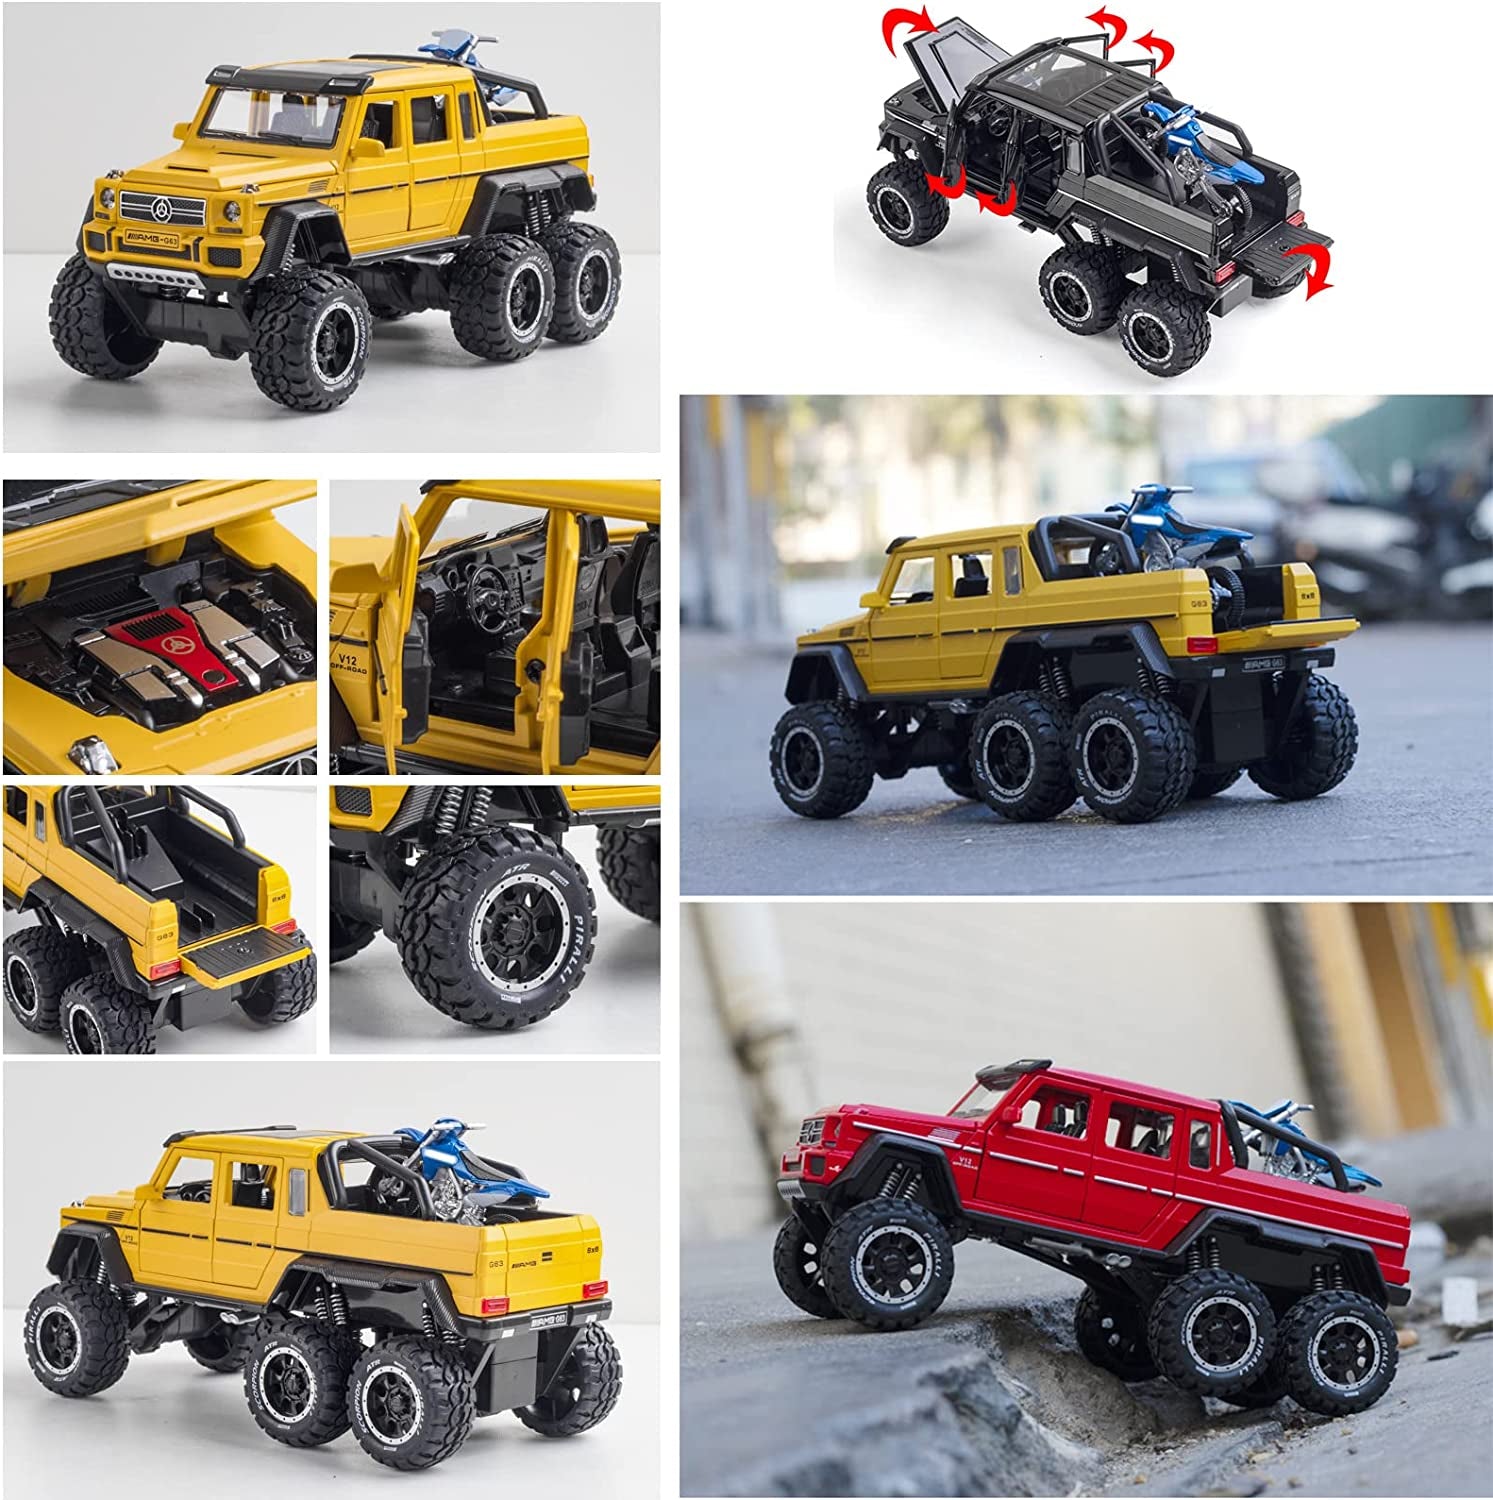 Pickup Truck Toy 6X6 Off-Road Refitted Model SUV Car 1/24 Scale Monster Trucks Diecast Metal Model Cars with Micro Motorcycle Sound and Light for Kids Age 3 Year and up Black